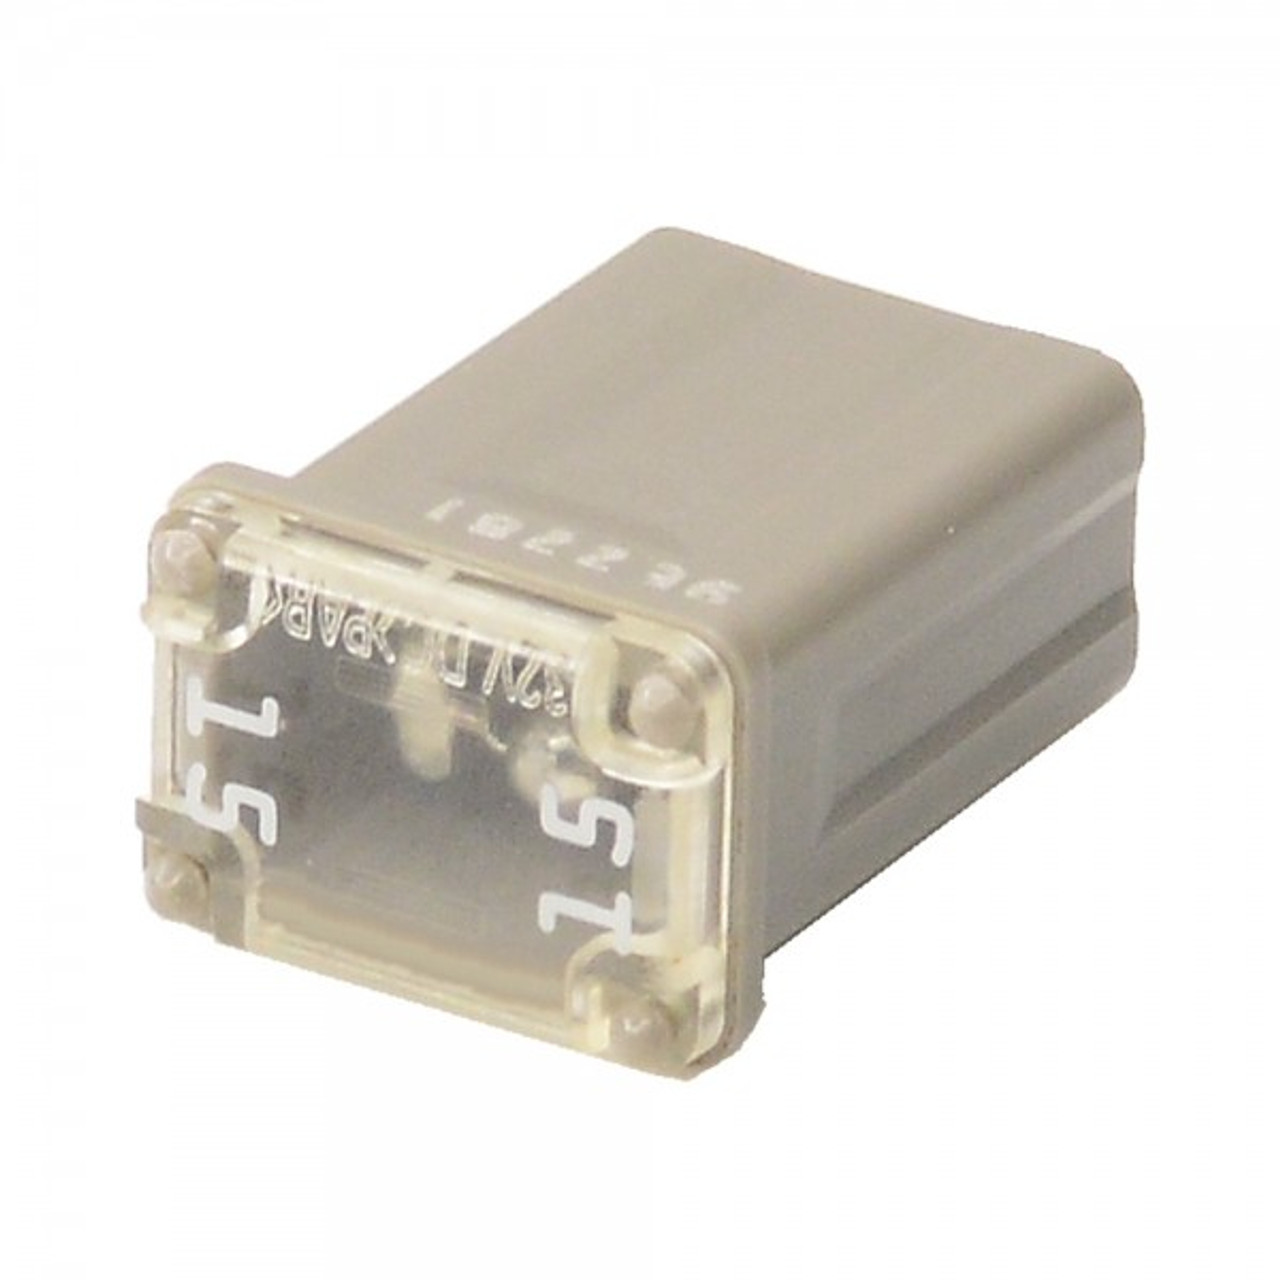 Fusible Links Micro Female Time Delay Fuse 15A 32V - Gray  82-FMX-M-15A